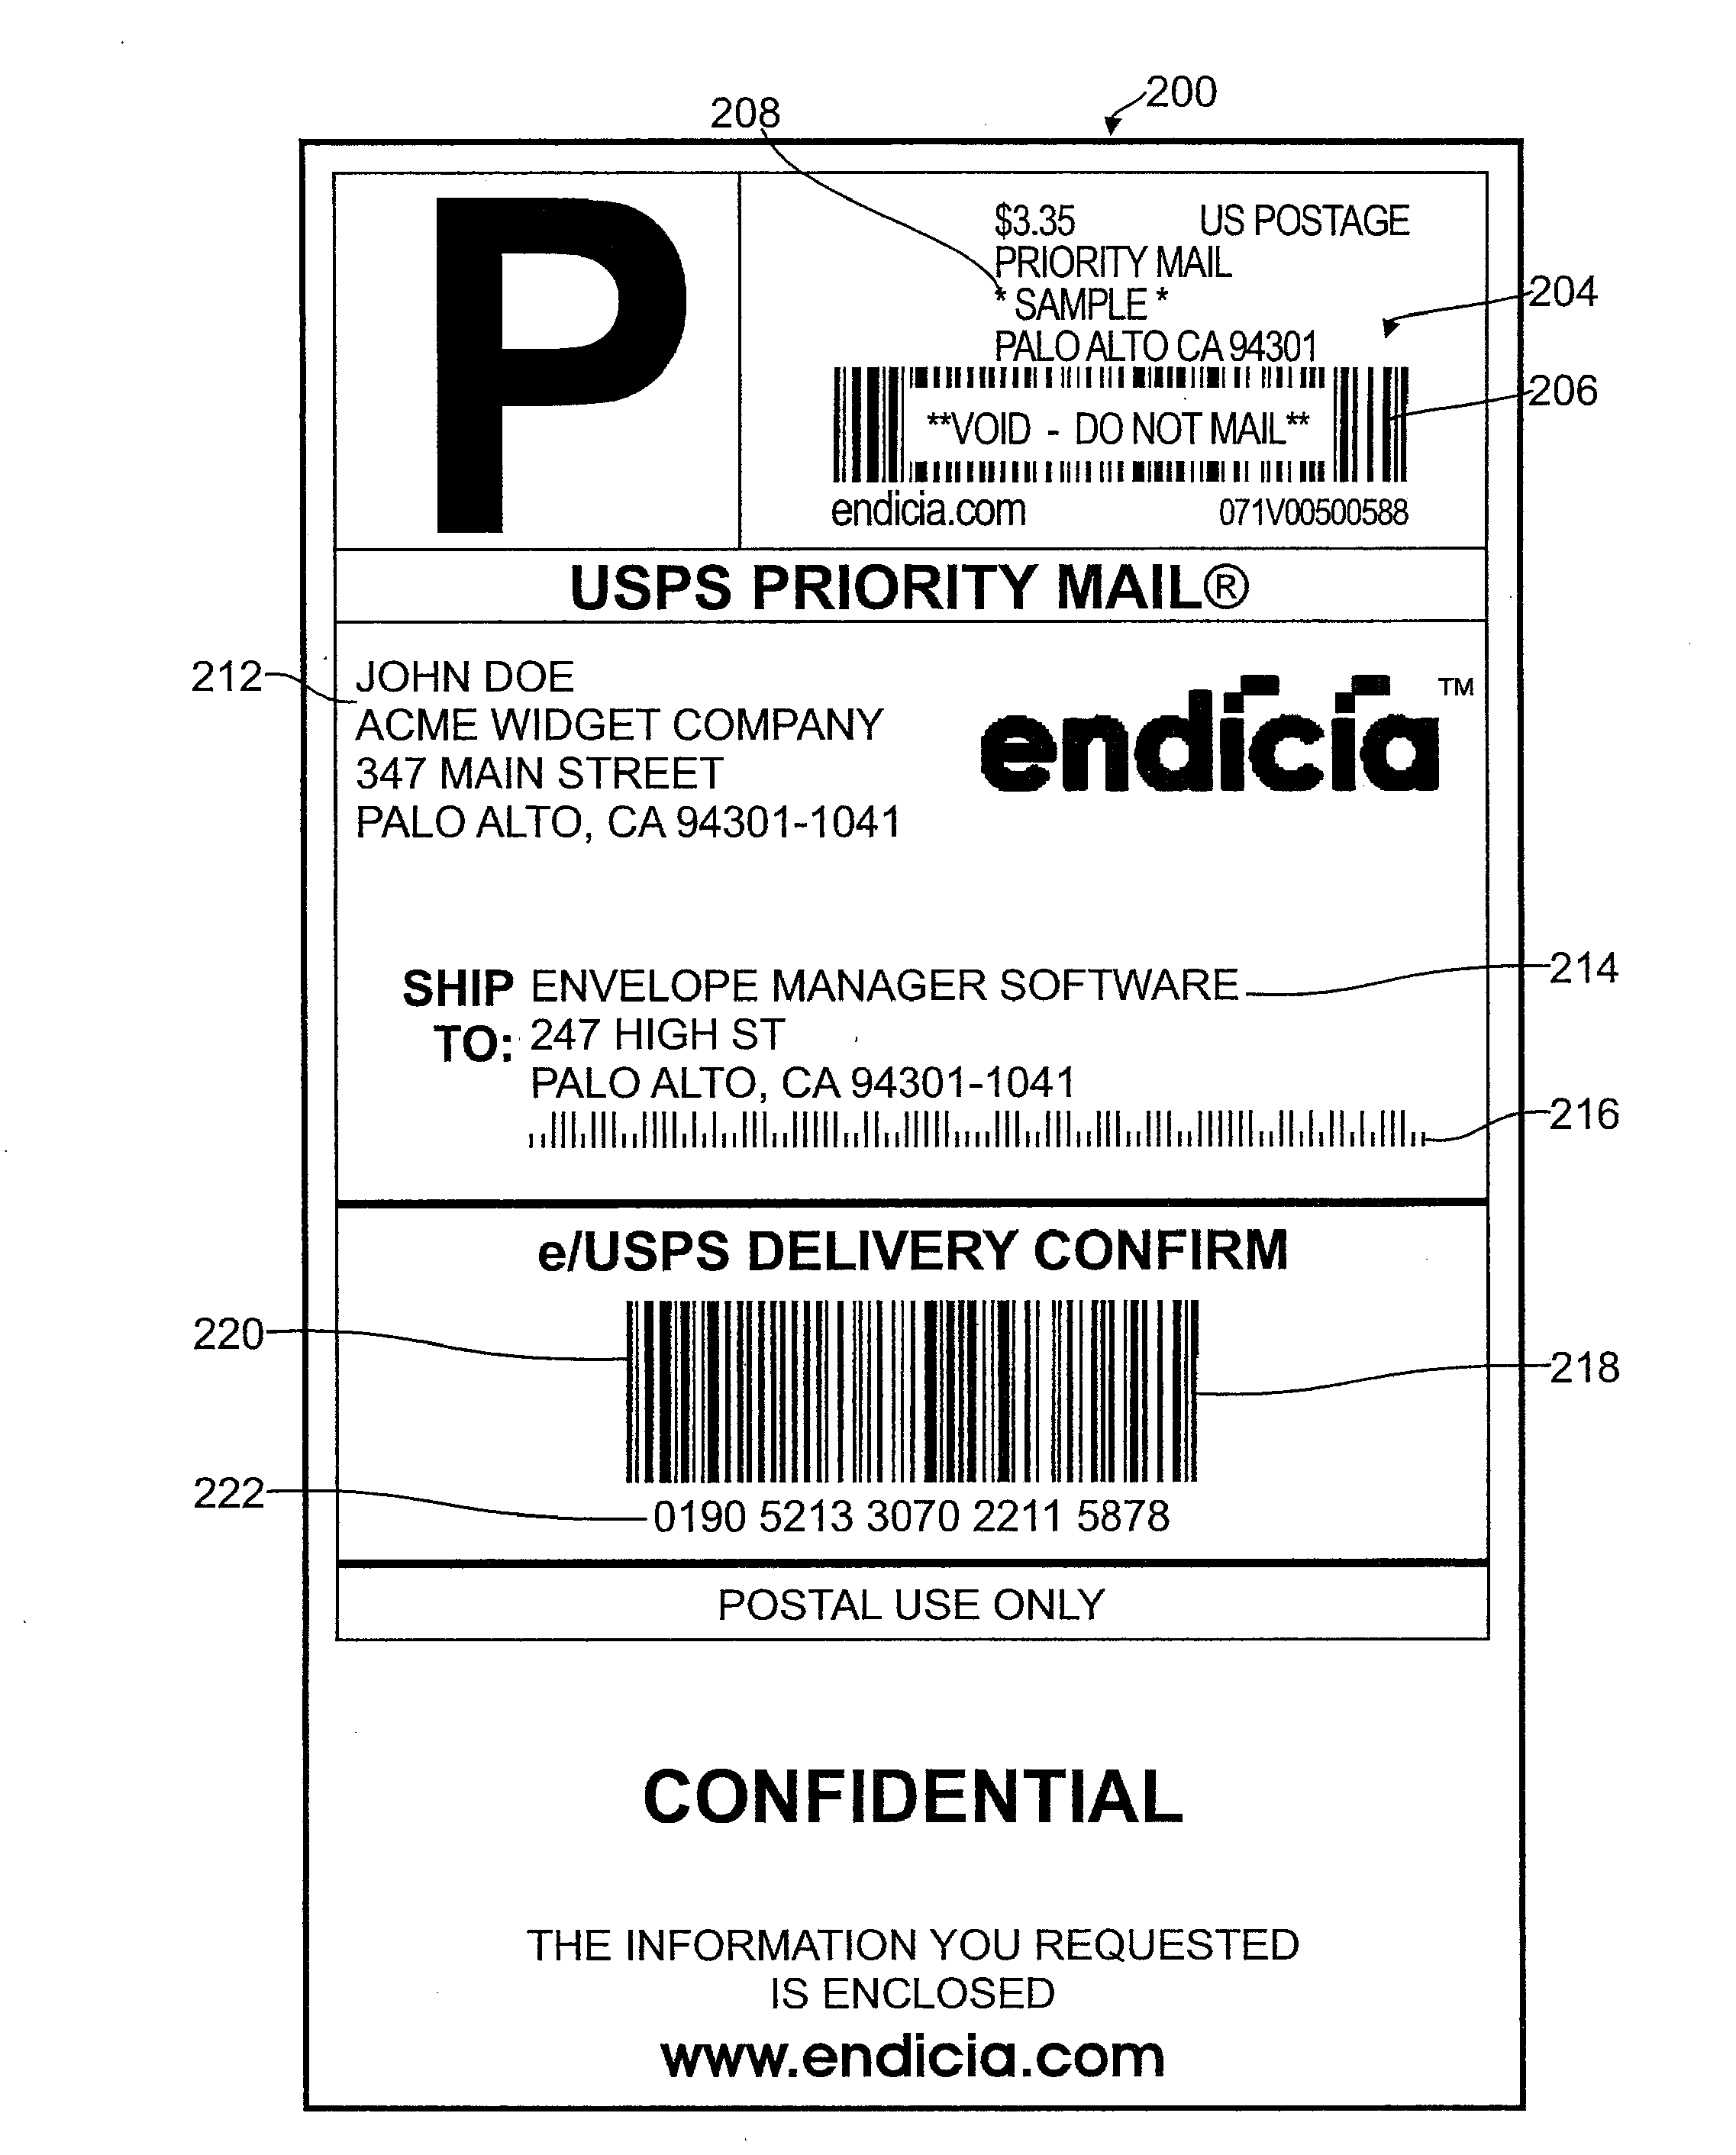 Systems and methods for detecting postage fraud using an indexed lookup procedure